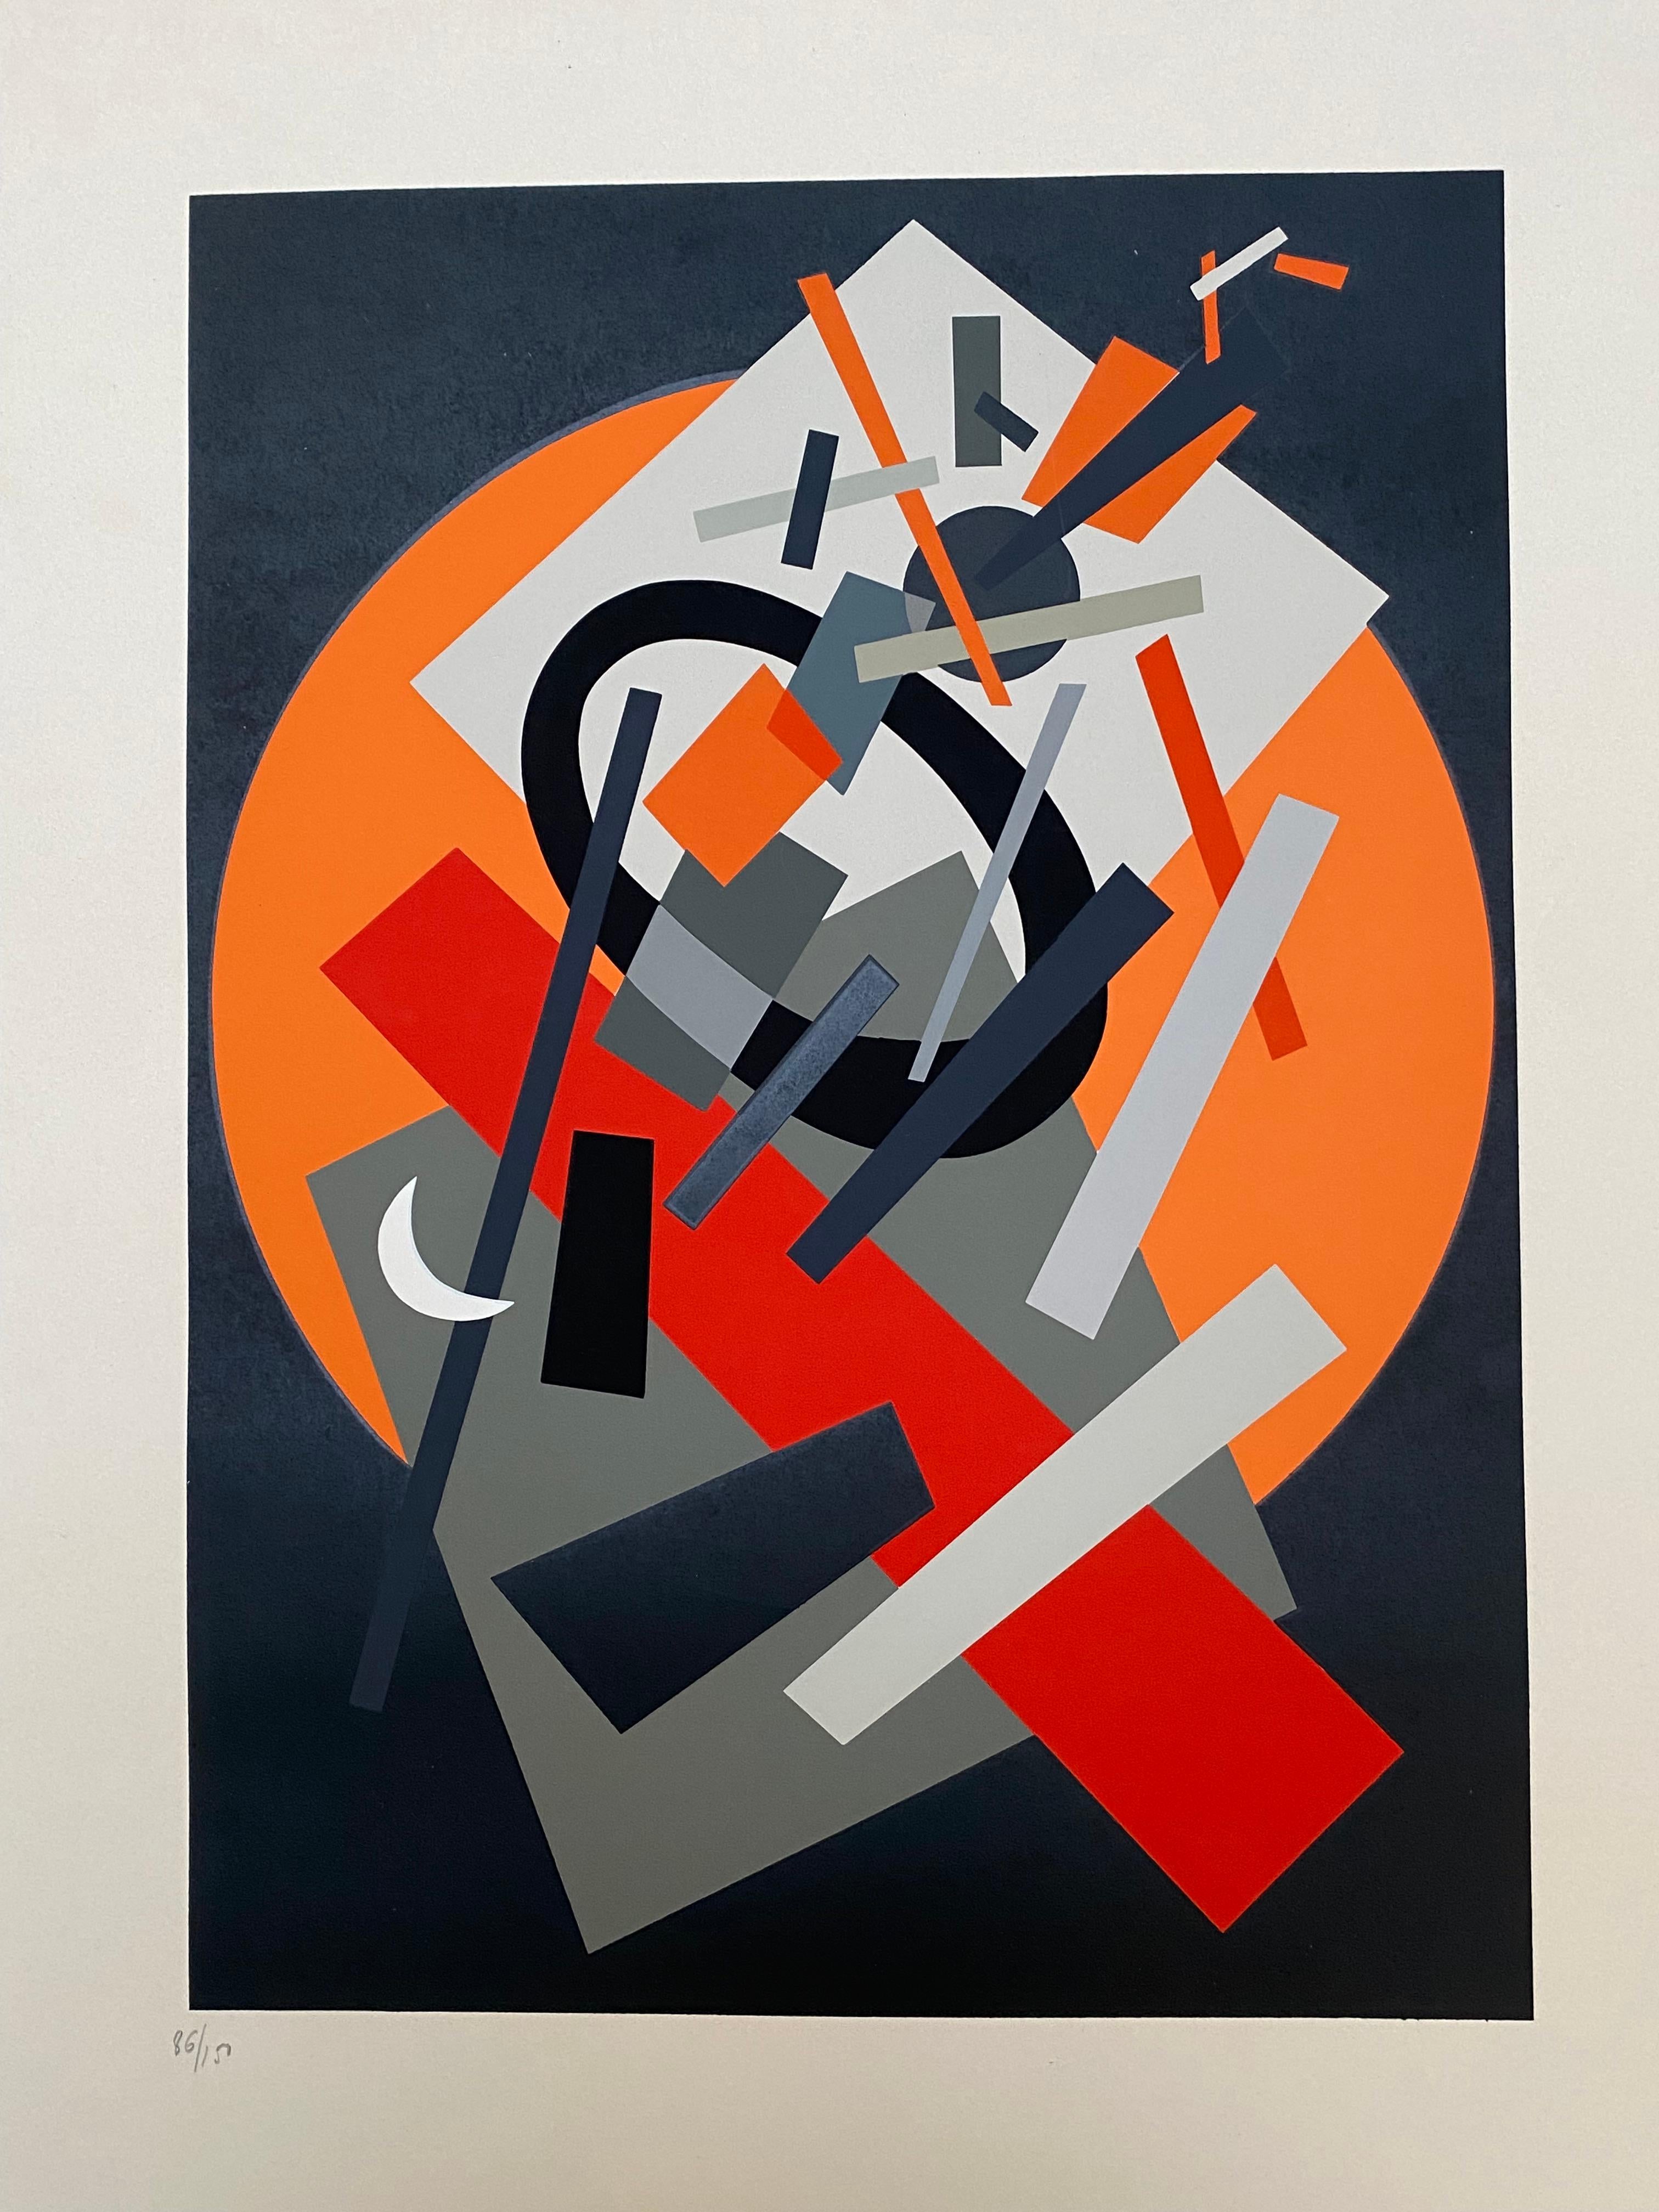 Suprematism
Silkscreen print by Nadia Leger
Suprematisme
Silkscreen print by Nadia Leger on Fabriano cotton paper.
Edition of 150 copies 
Numbered in pencil
Circa 1970
Very good condition 
Paper 69 x 50 cms
Subject 50 x 36,5 cms 
1300 euros